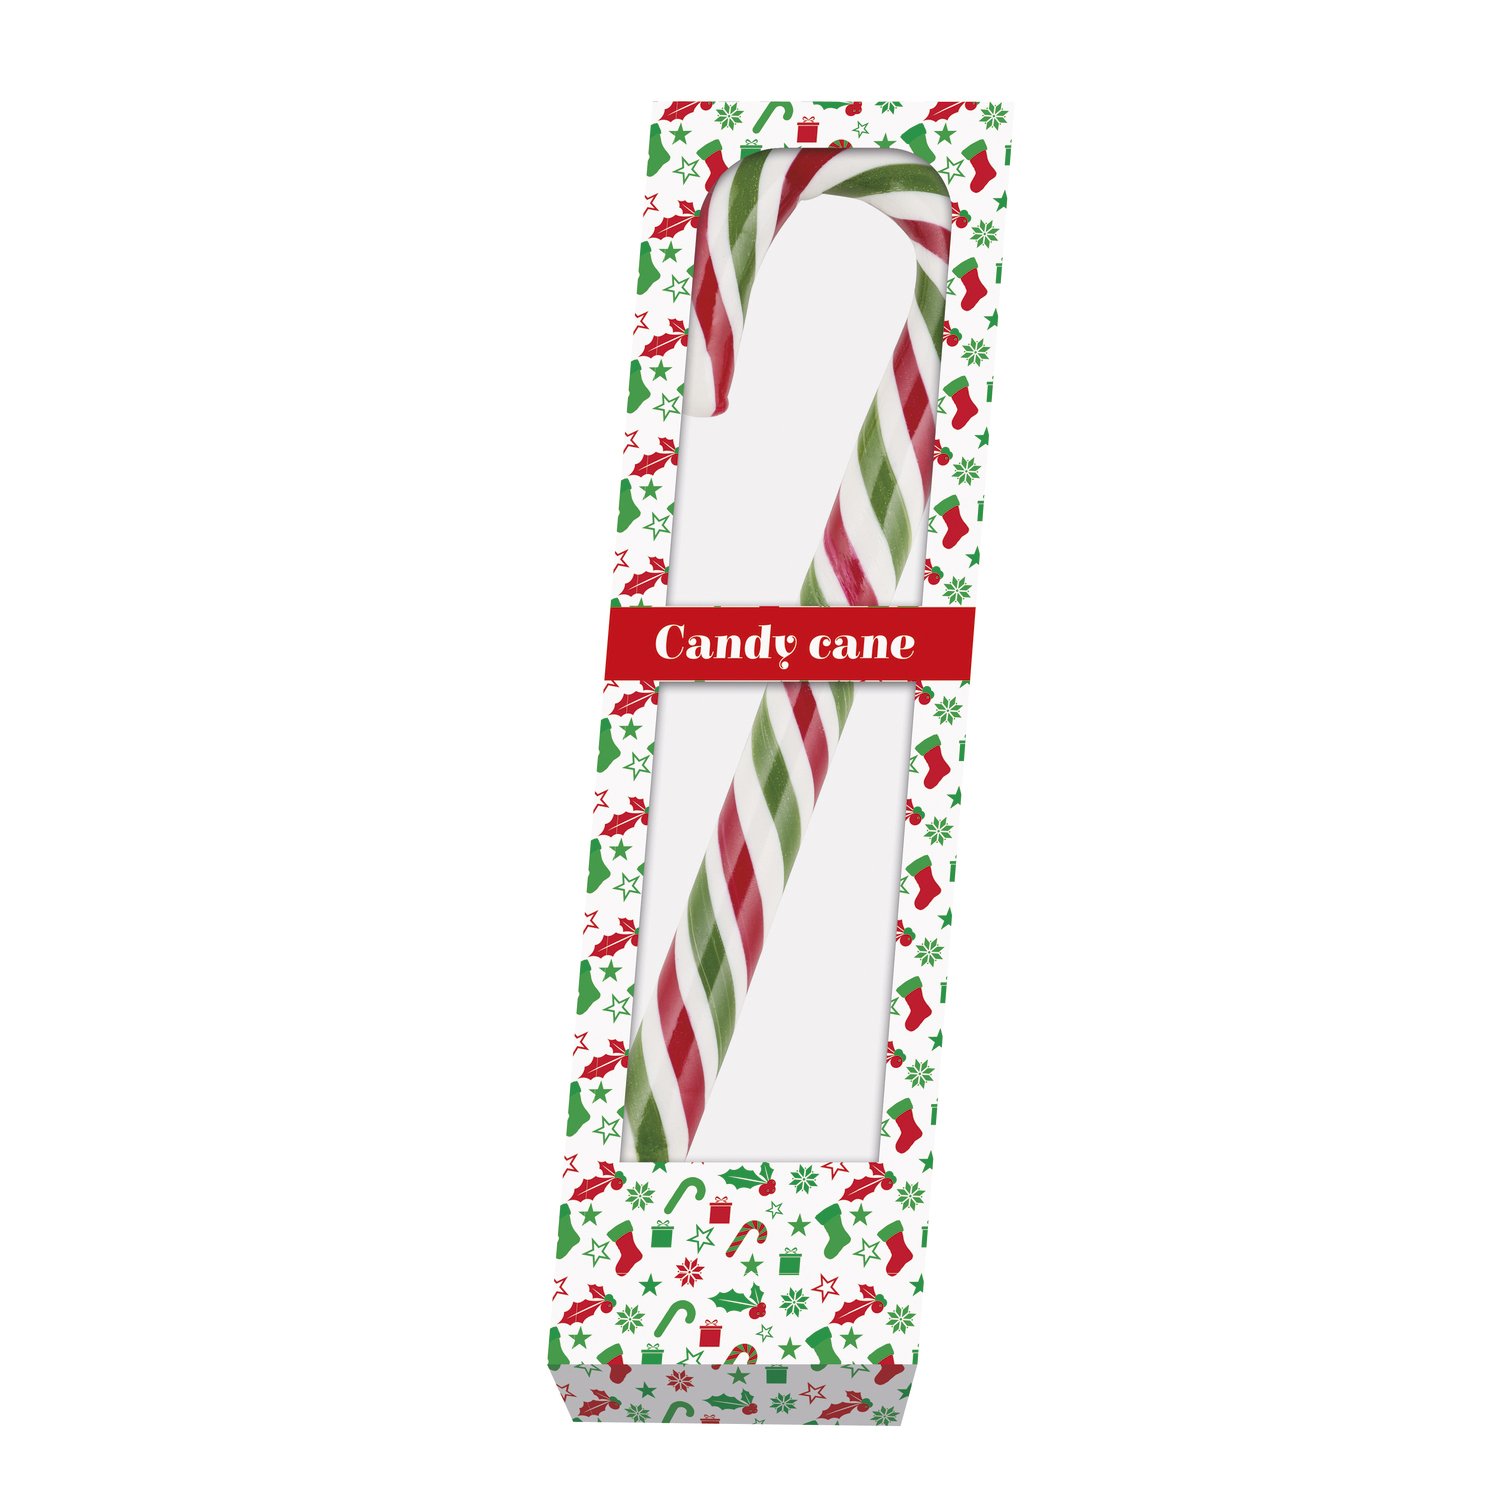 Giant candy cane 24.8cm - 10x100g